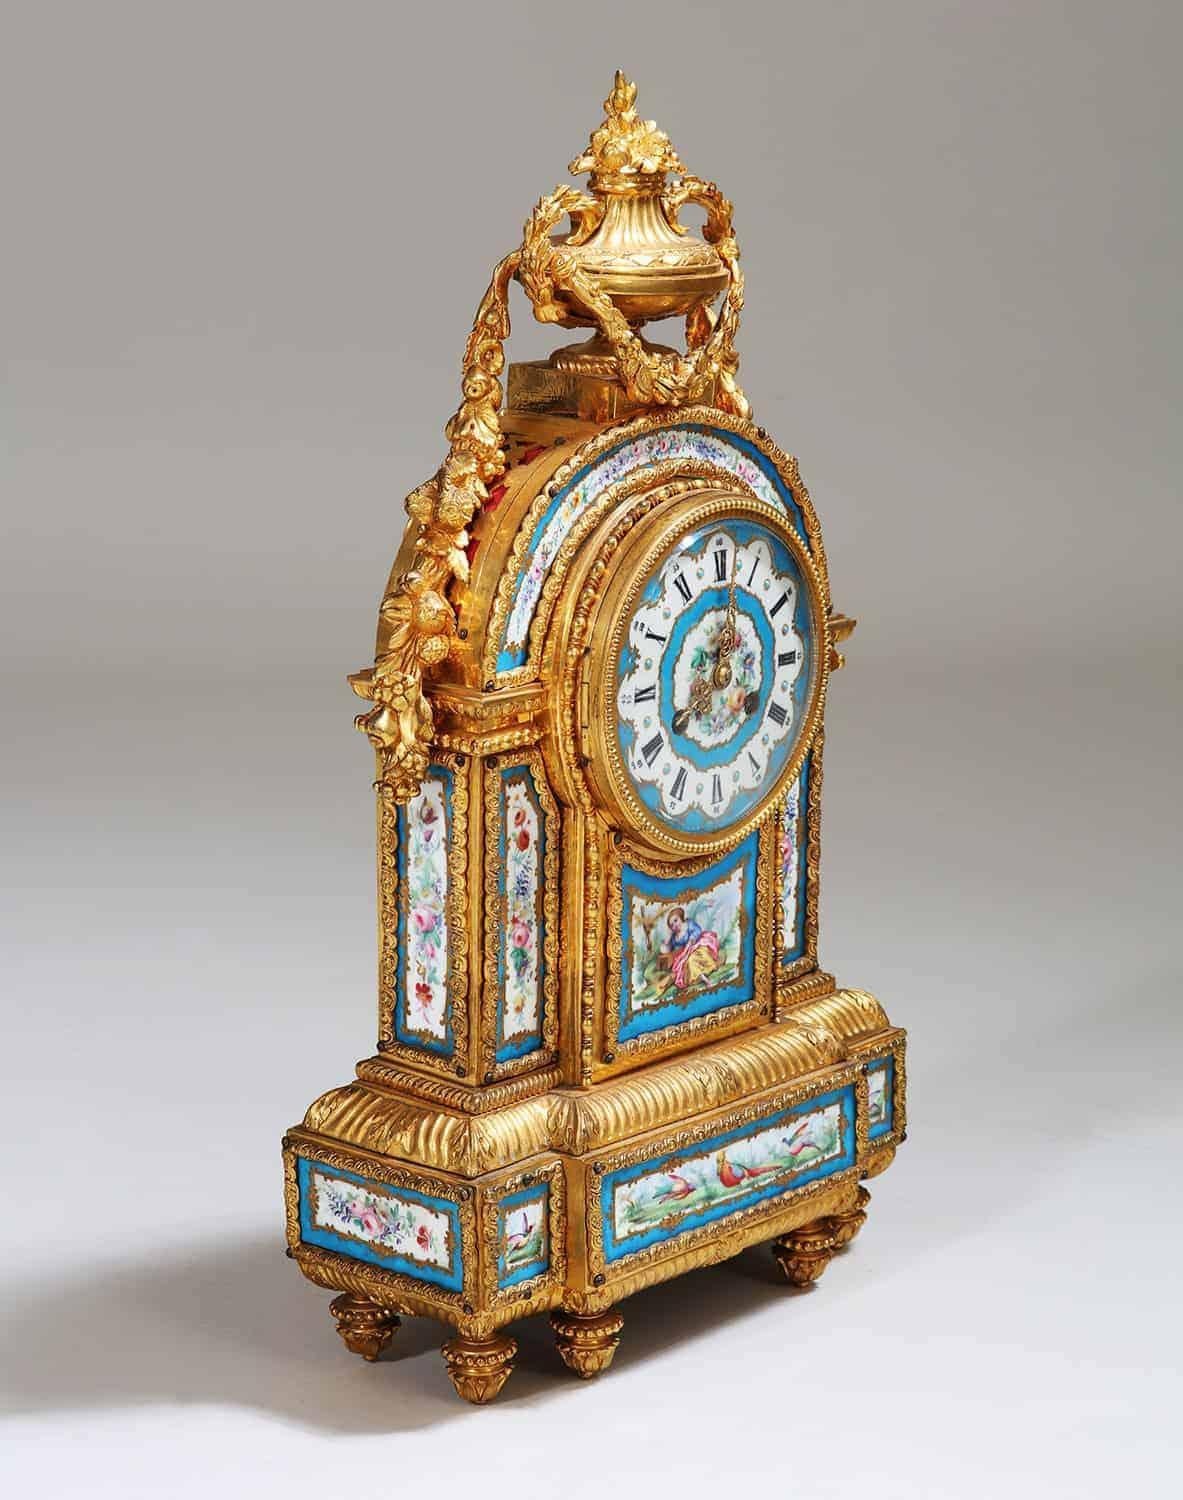 A rare and very fine 19th century Napoleonic era Sevres Porcelain mantel clock, The richly chased ormolu gilt bronze body inset with 11 panels of porcelain with floral scenes, birds and figures within blue celeste borders and the clock face with